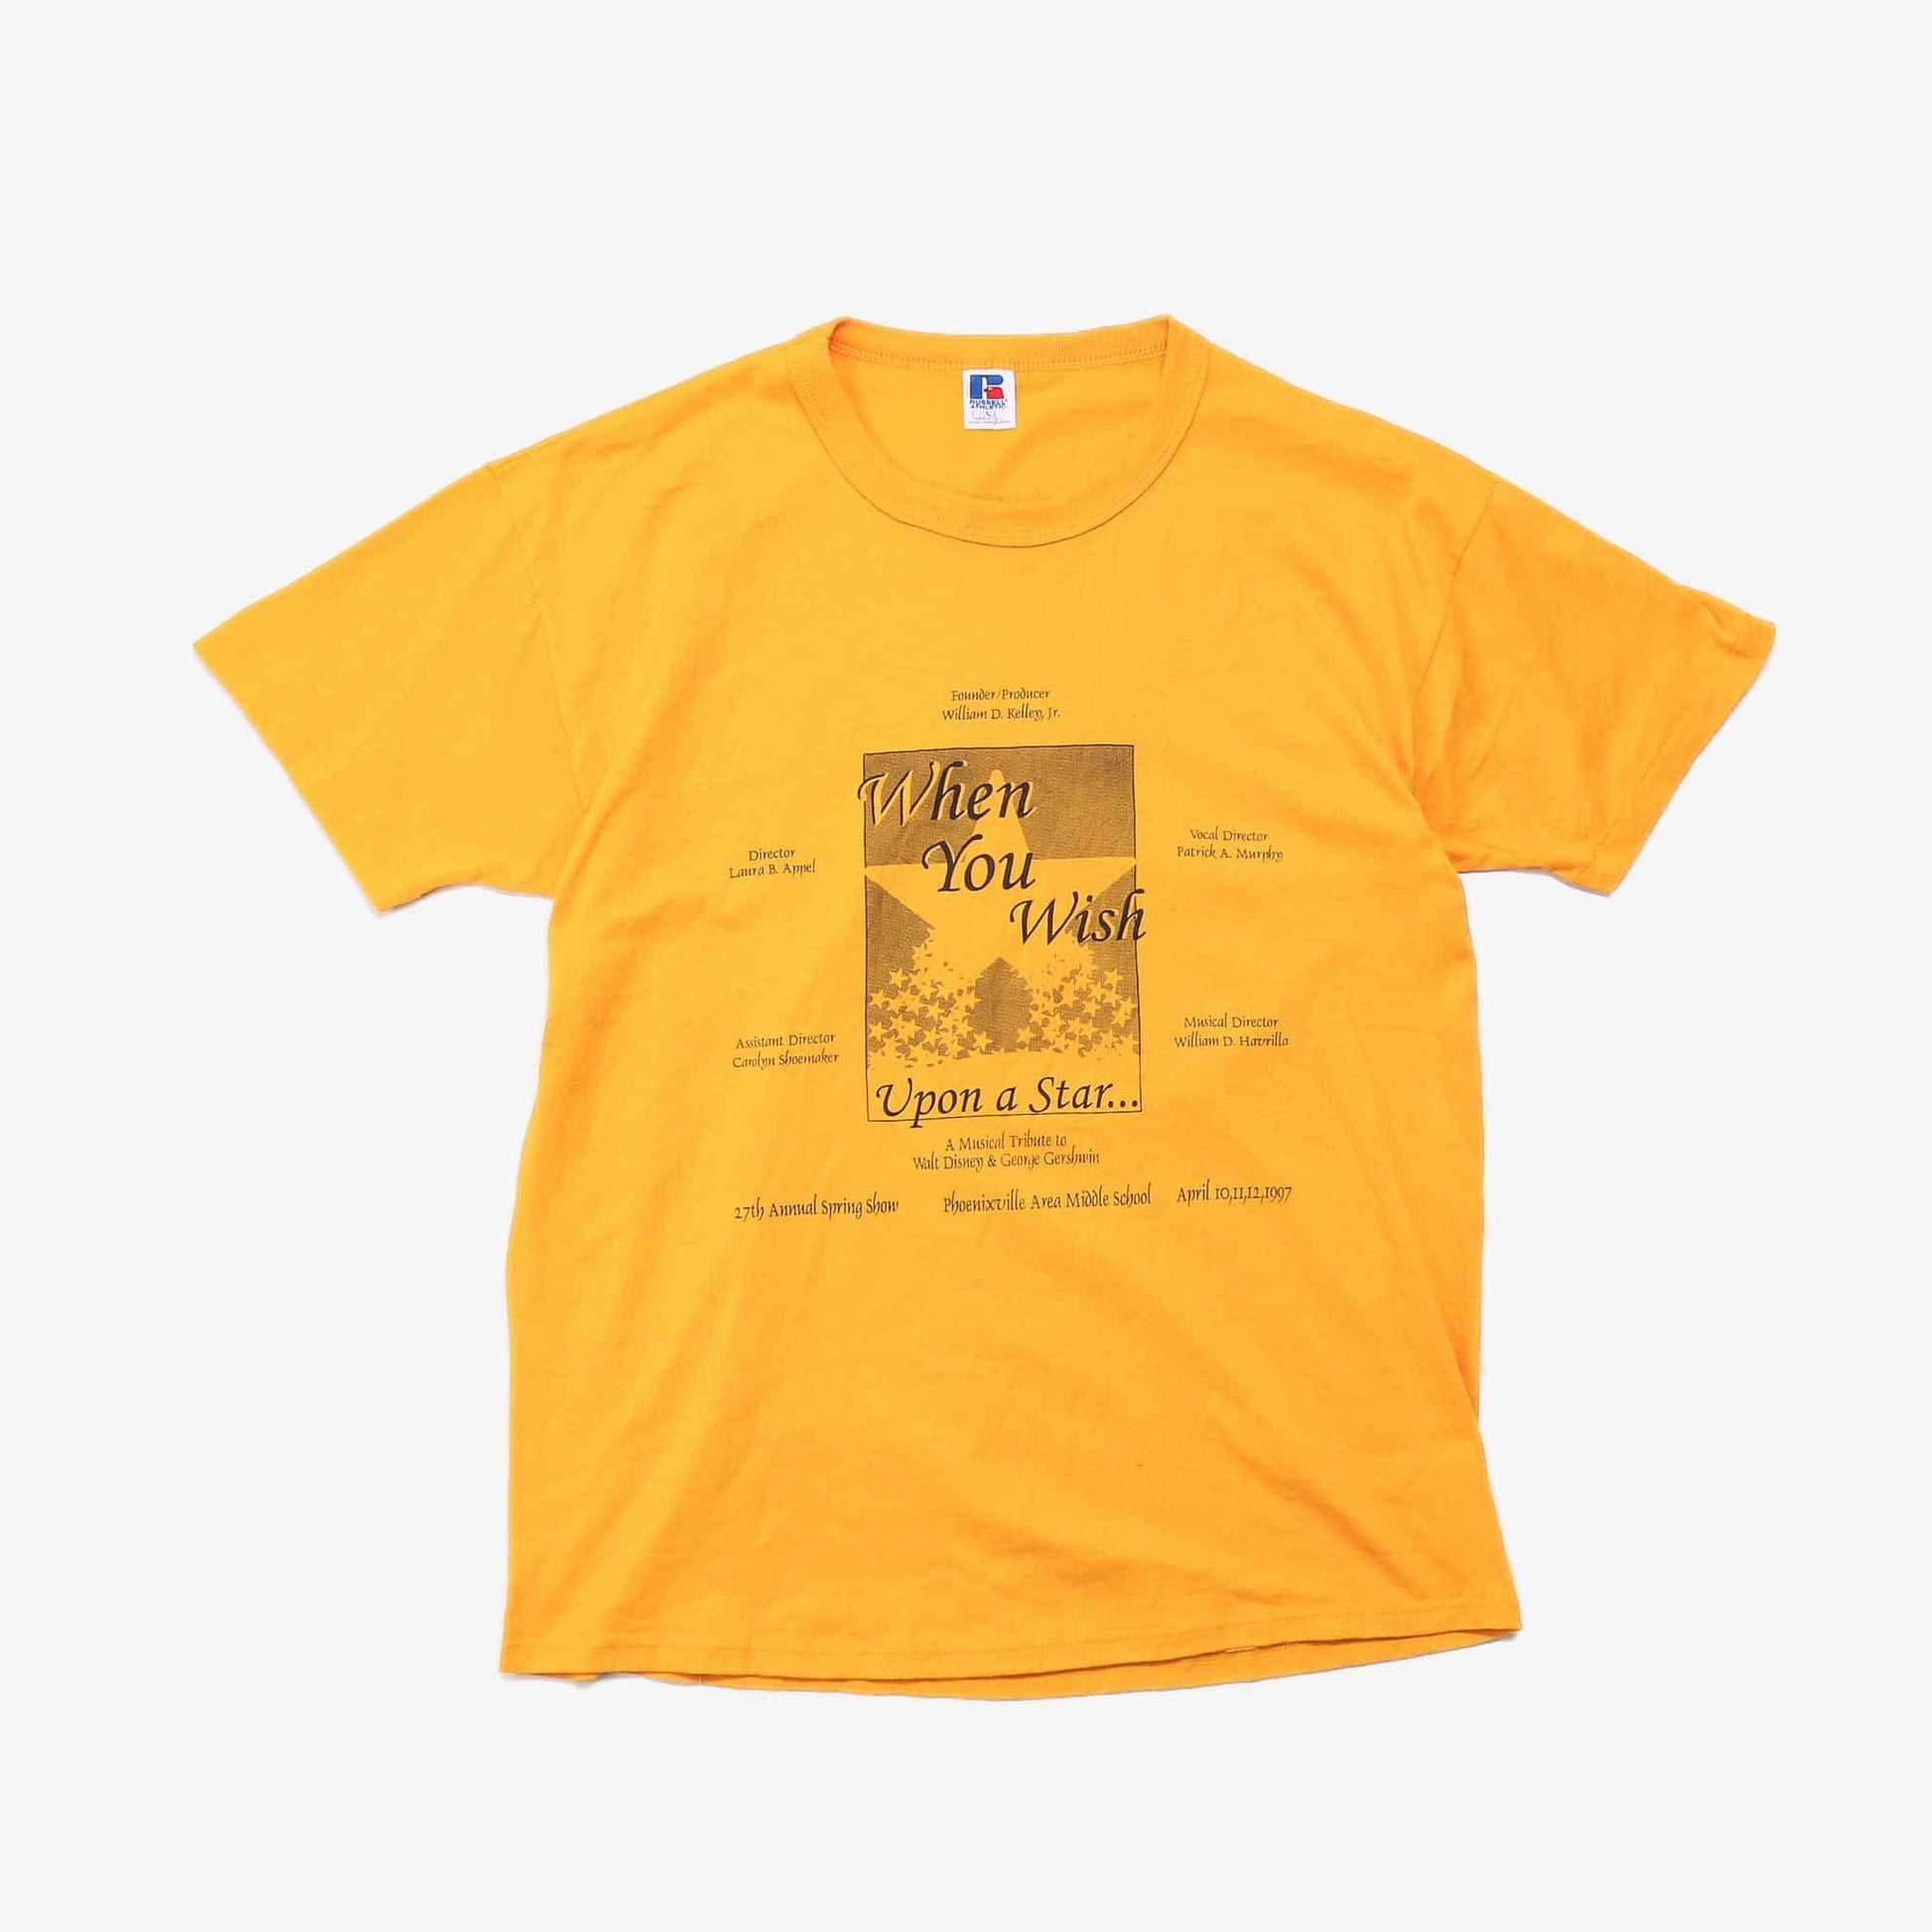 Vintage 'When You Wish' T-Shirt - American Madness